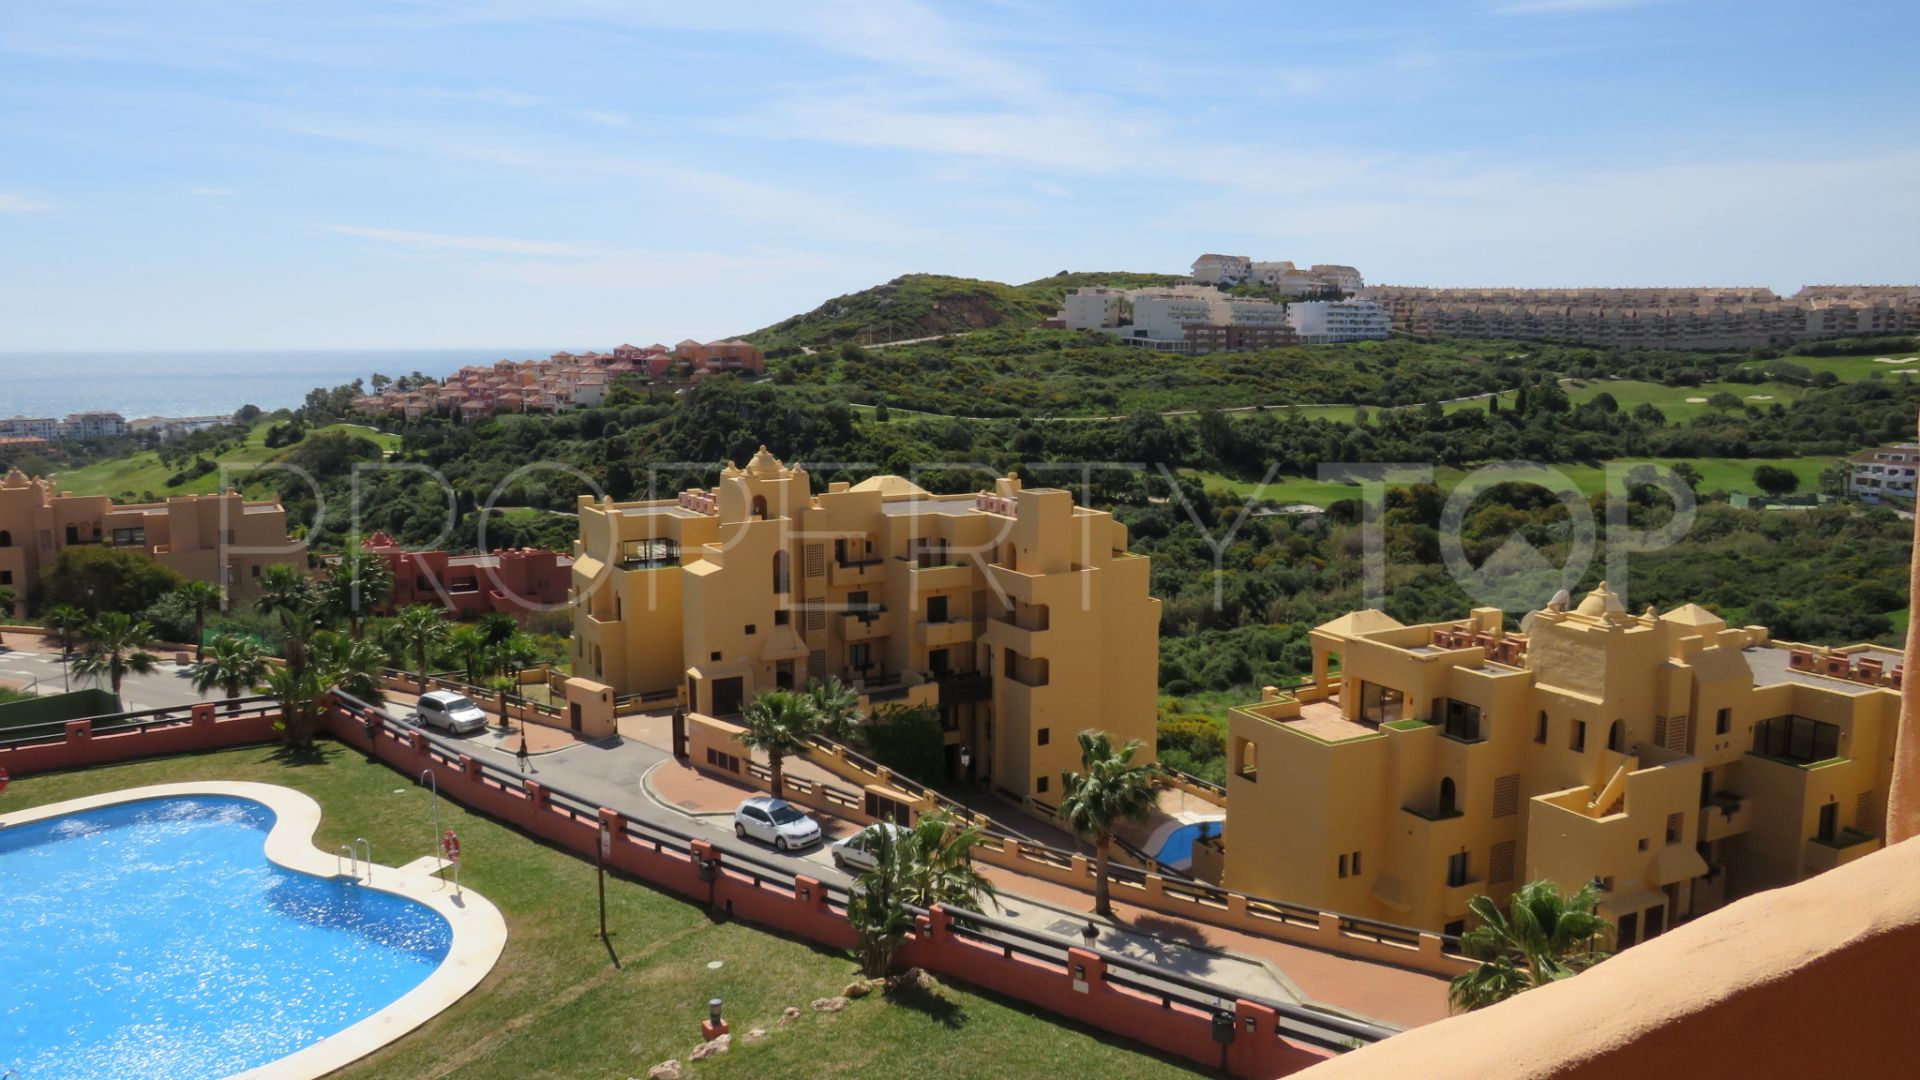 Sabinillas apartment for sale